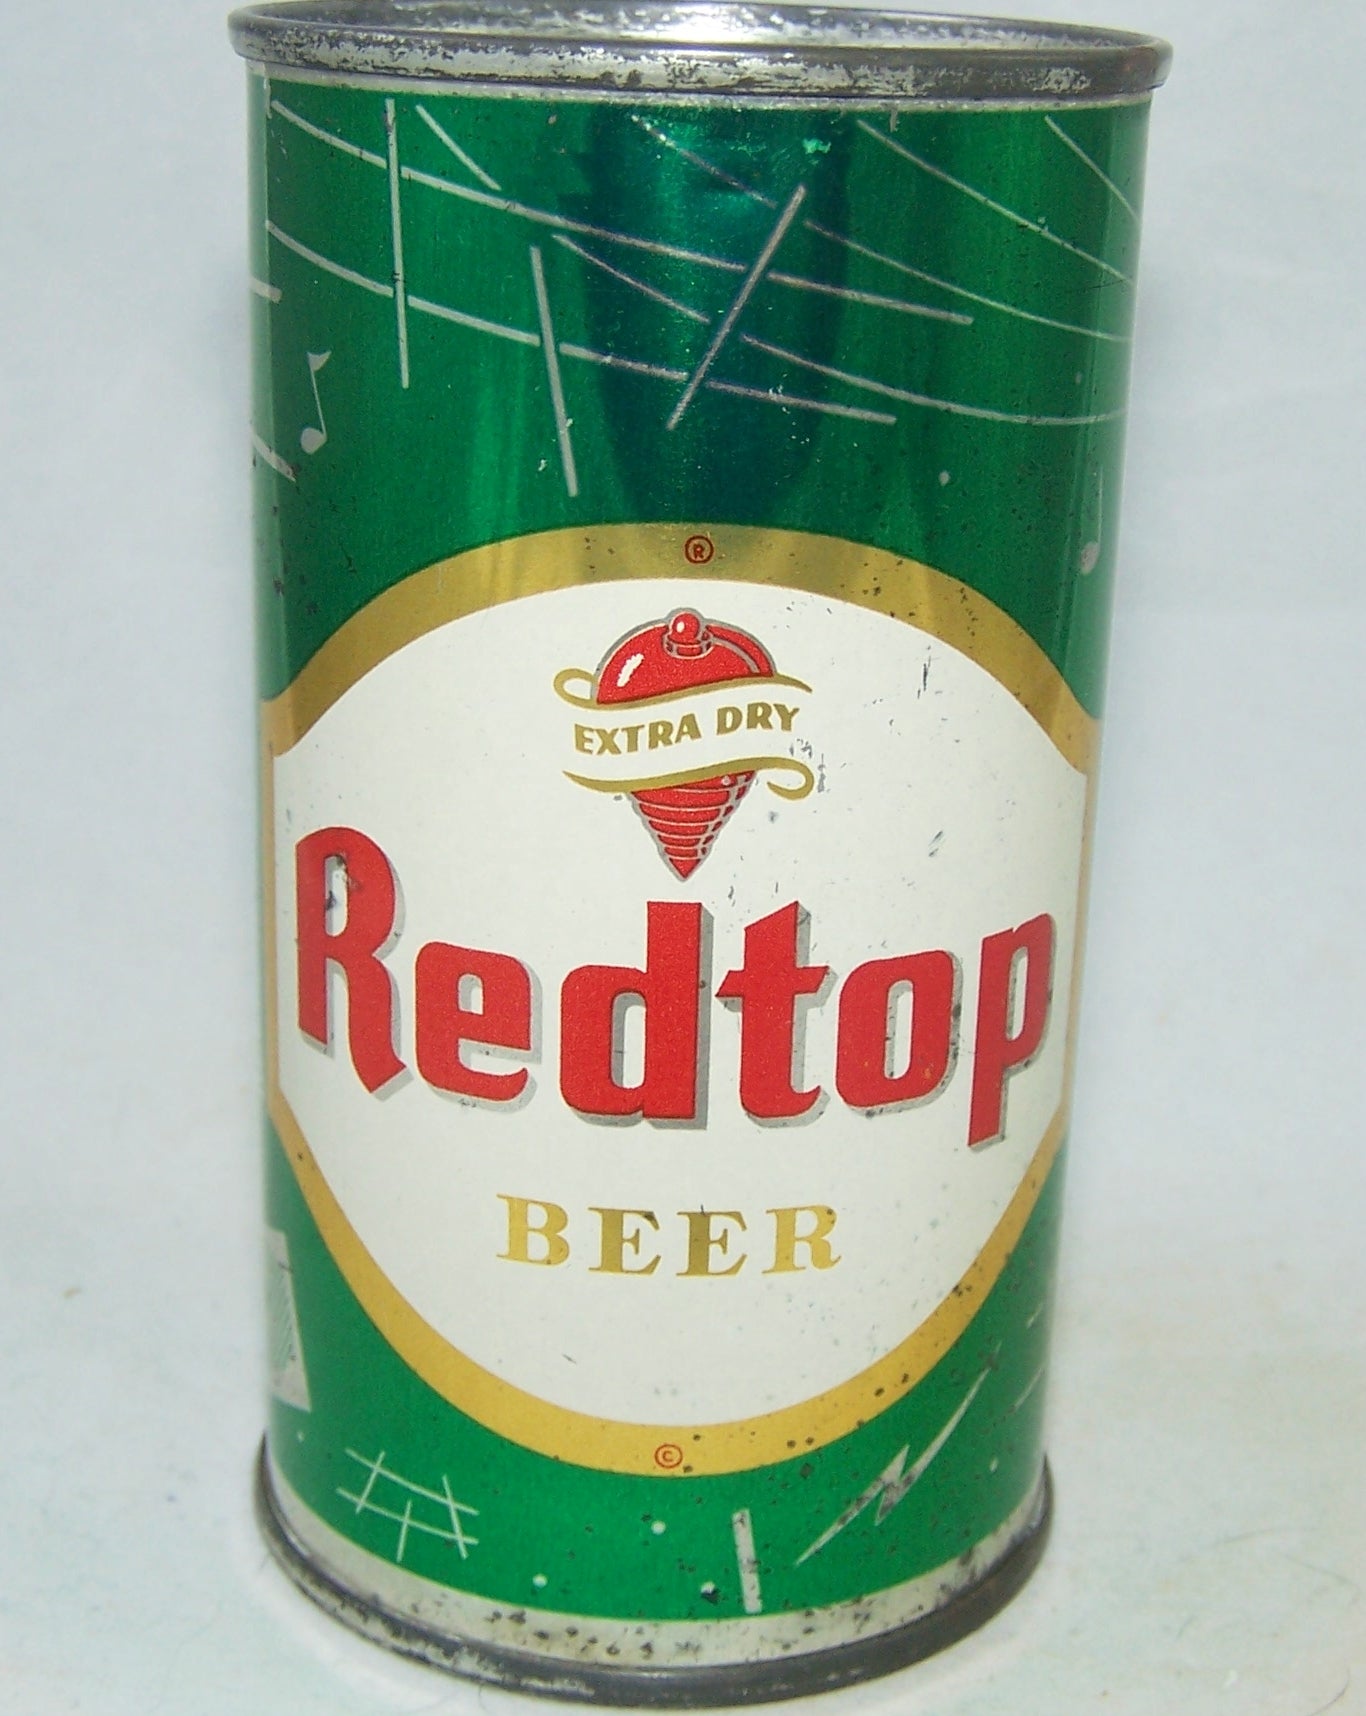 Red Top Beer (Radio) USBC 120-14, Grade 1/1- Sold on 04/06/18